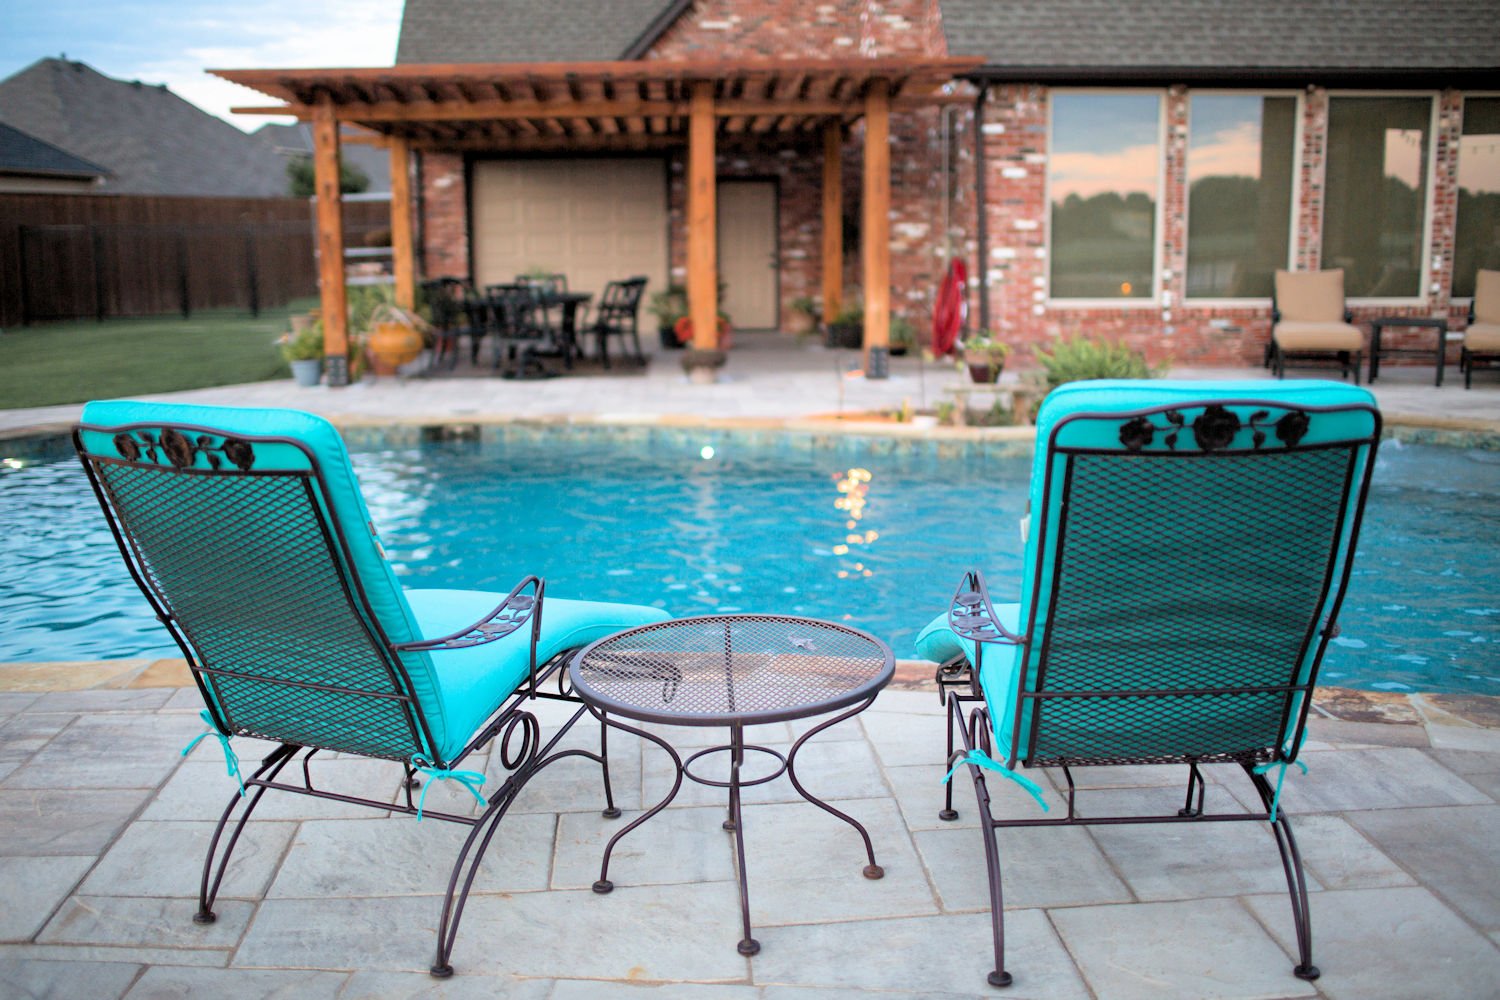 5 Things to Consider When Designing a Custom Pool